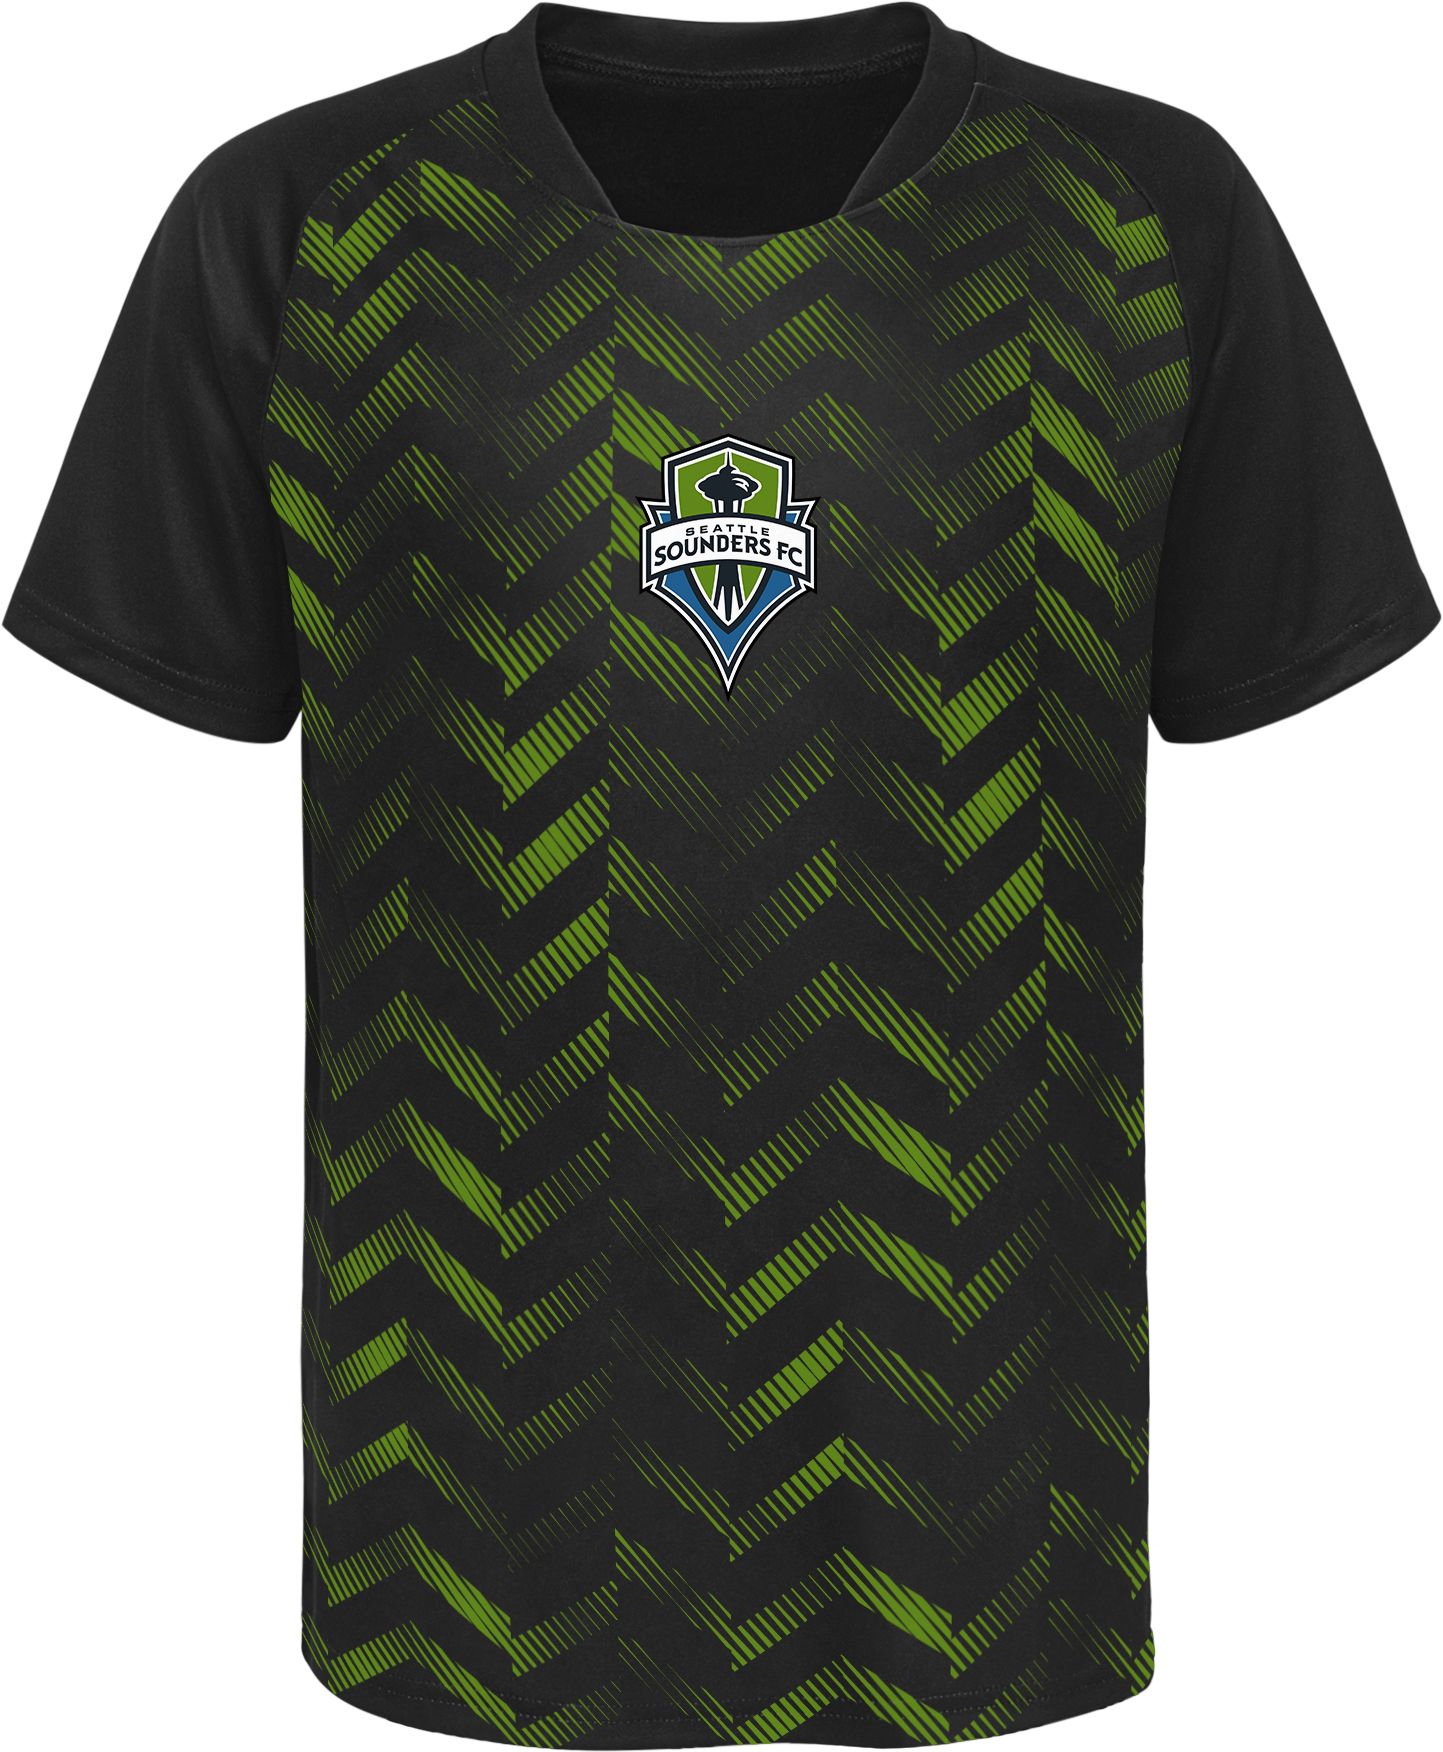 sounders jersey youth